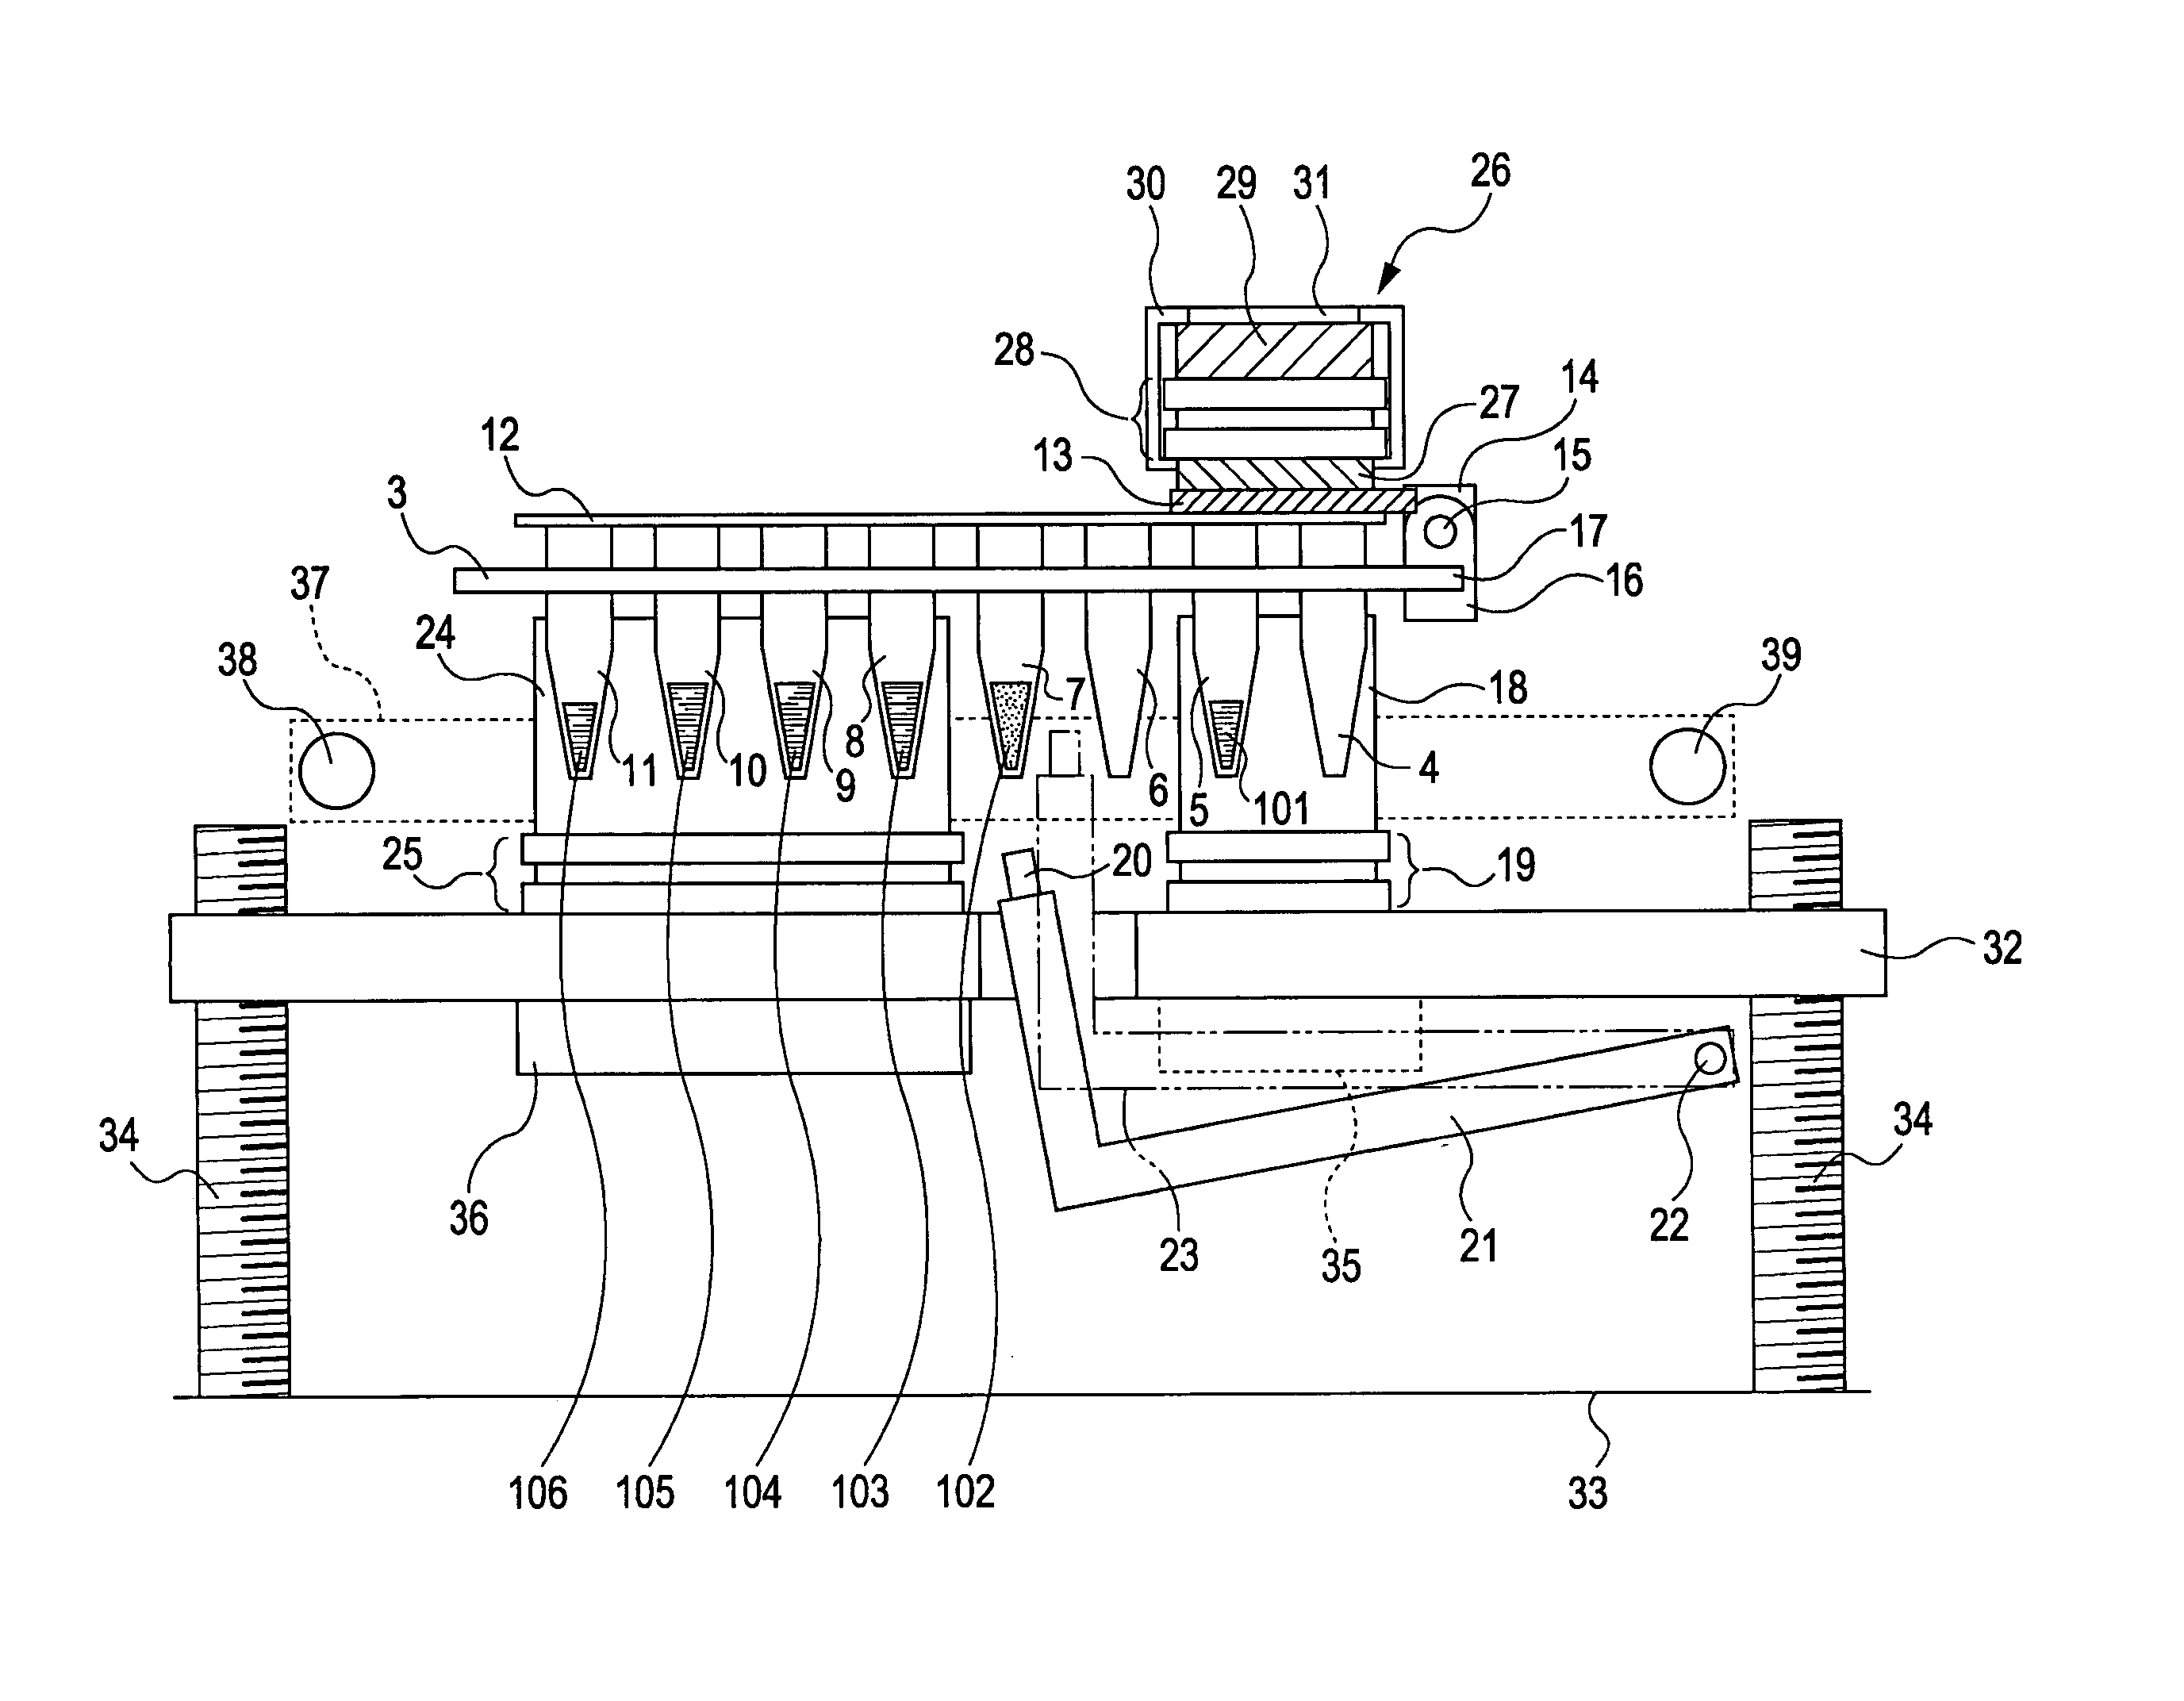 Apparatus for performing biochemical processing using a container with a plurality of wells and the container for the apparatus